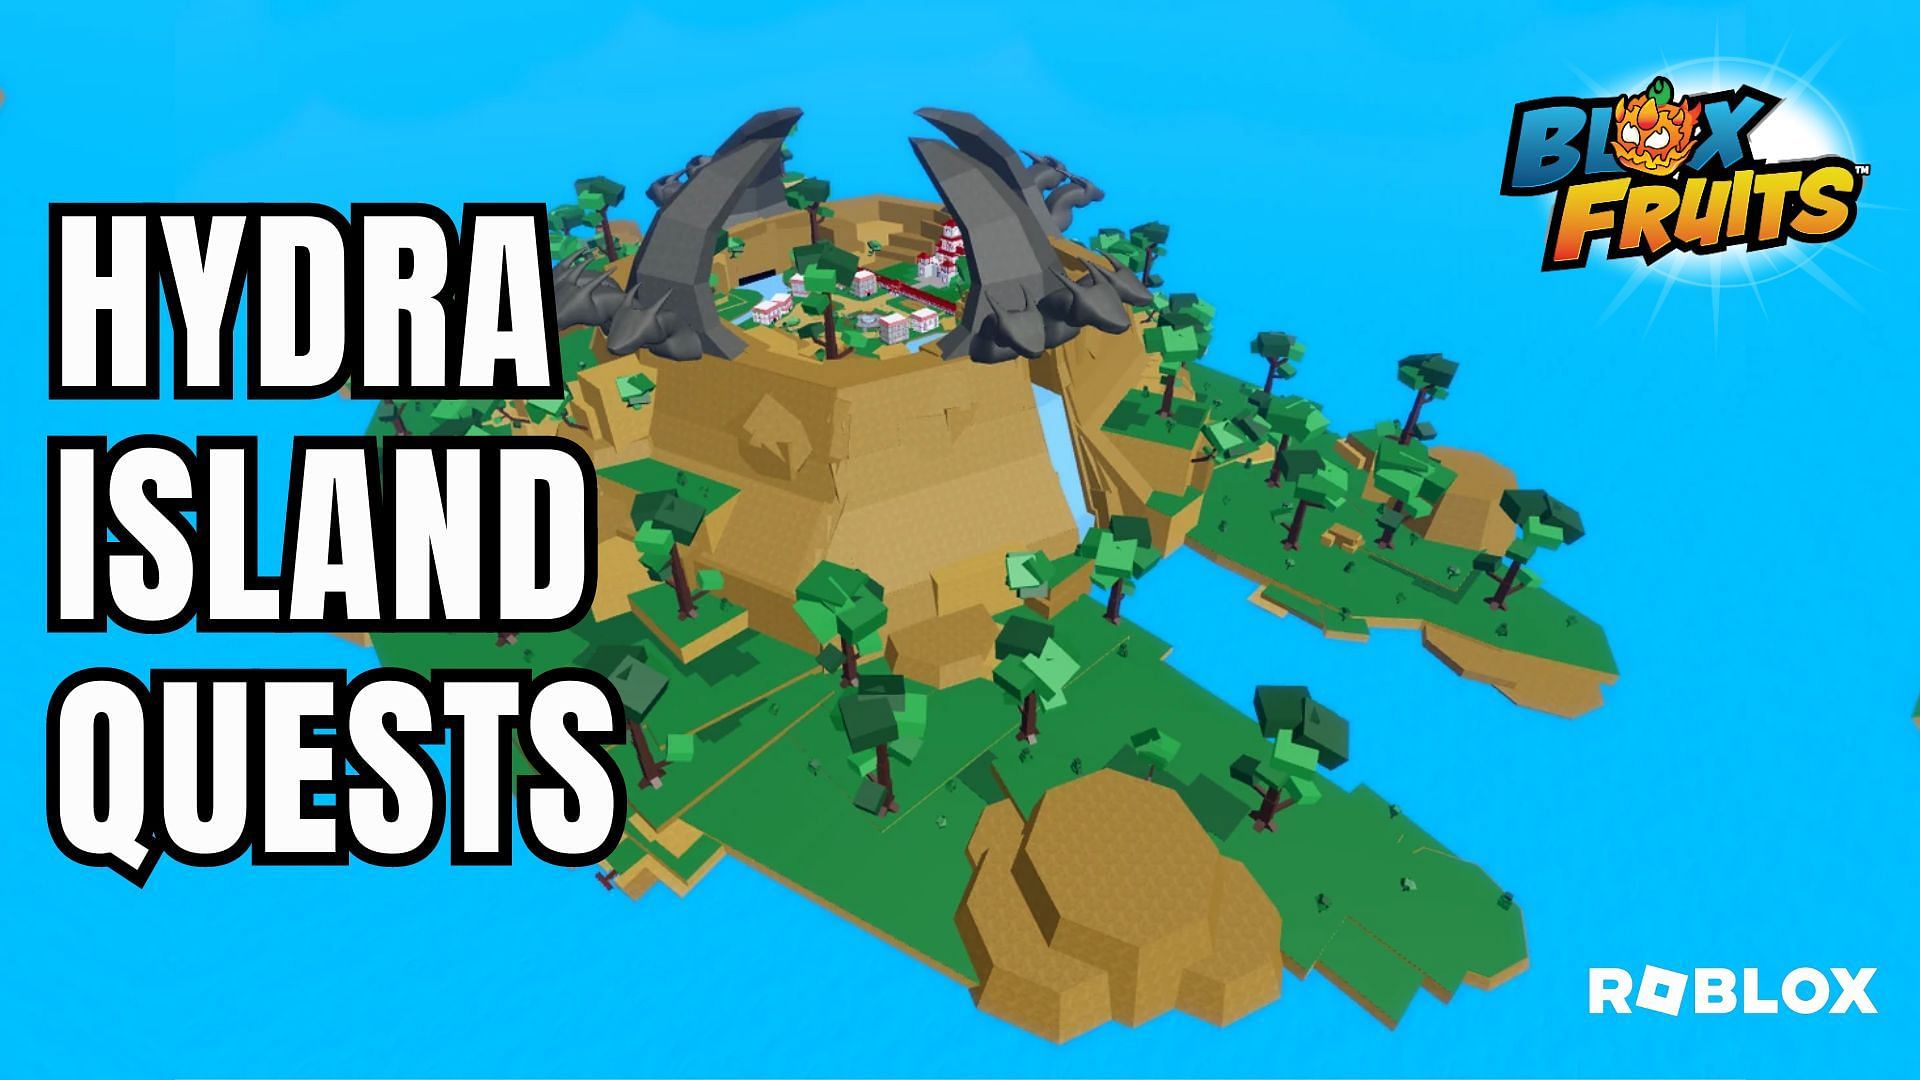 All Islands, Locations, and Level Requirements in Roblox Blox Fruits -  Gamer Journalist